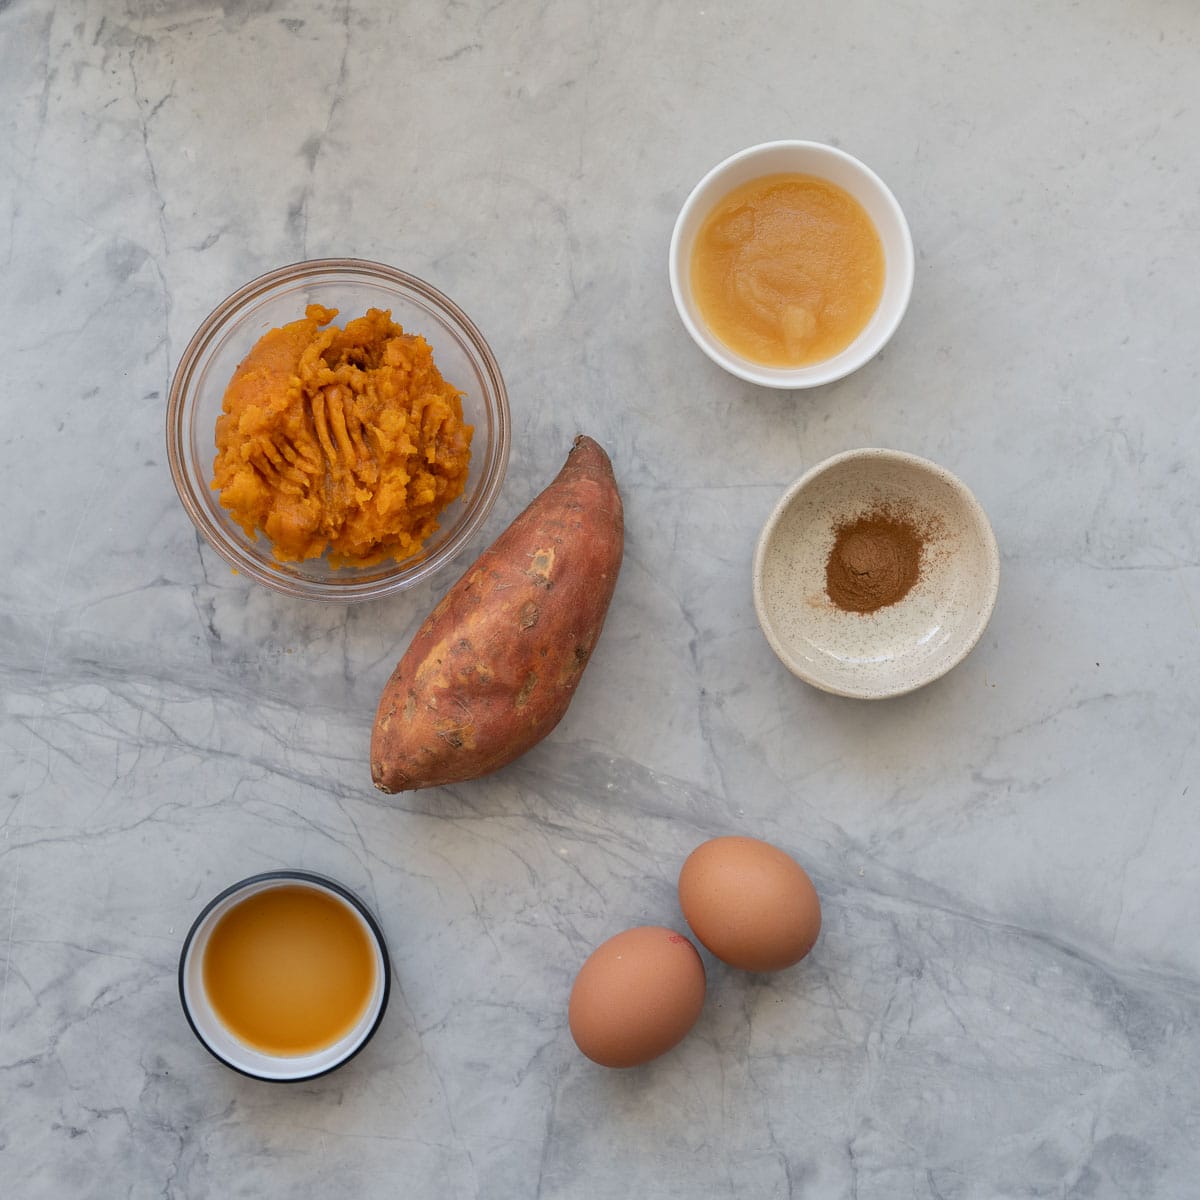 The ingredients to make sweet potato pancakes measured and laid out on a marble bench top.